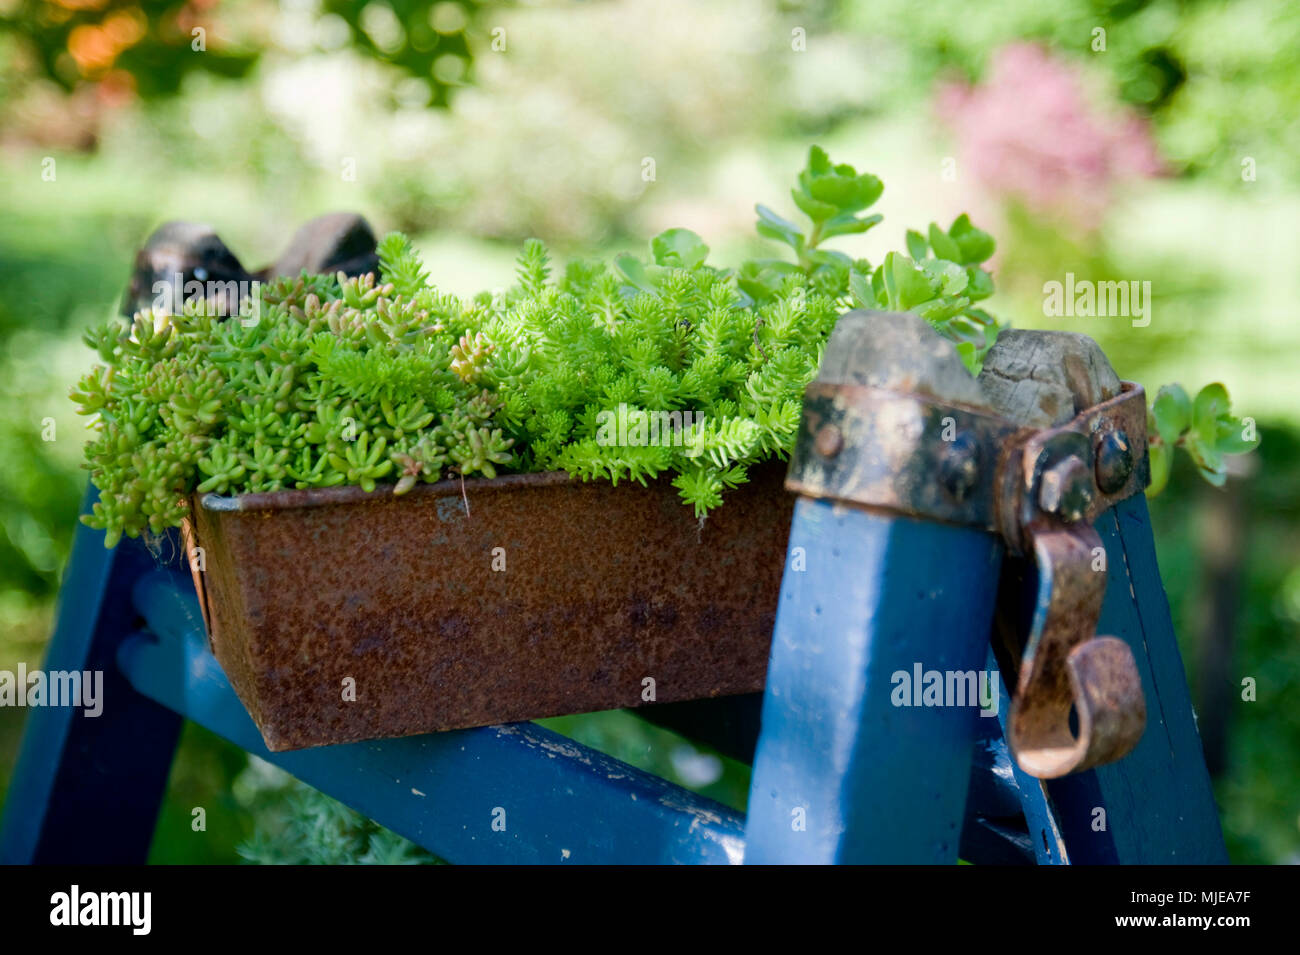 Succulents in an old baking dish Stock Photo